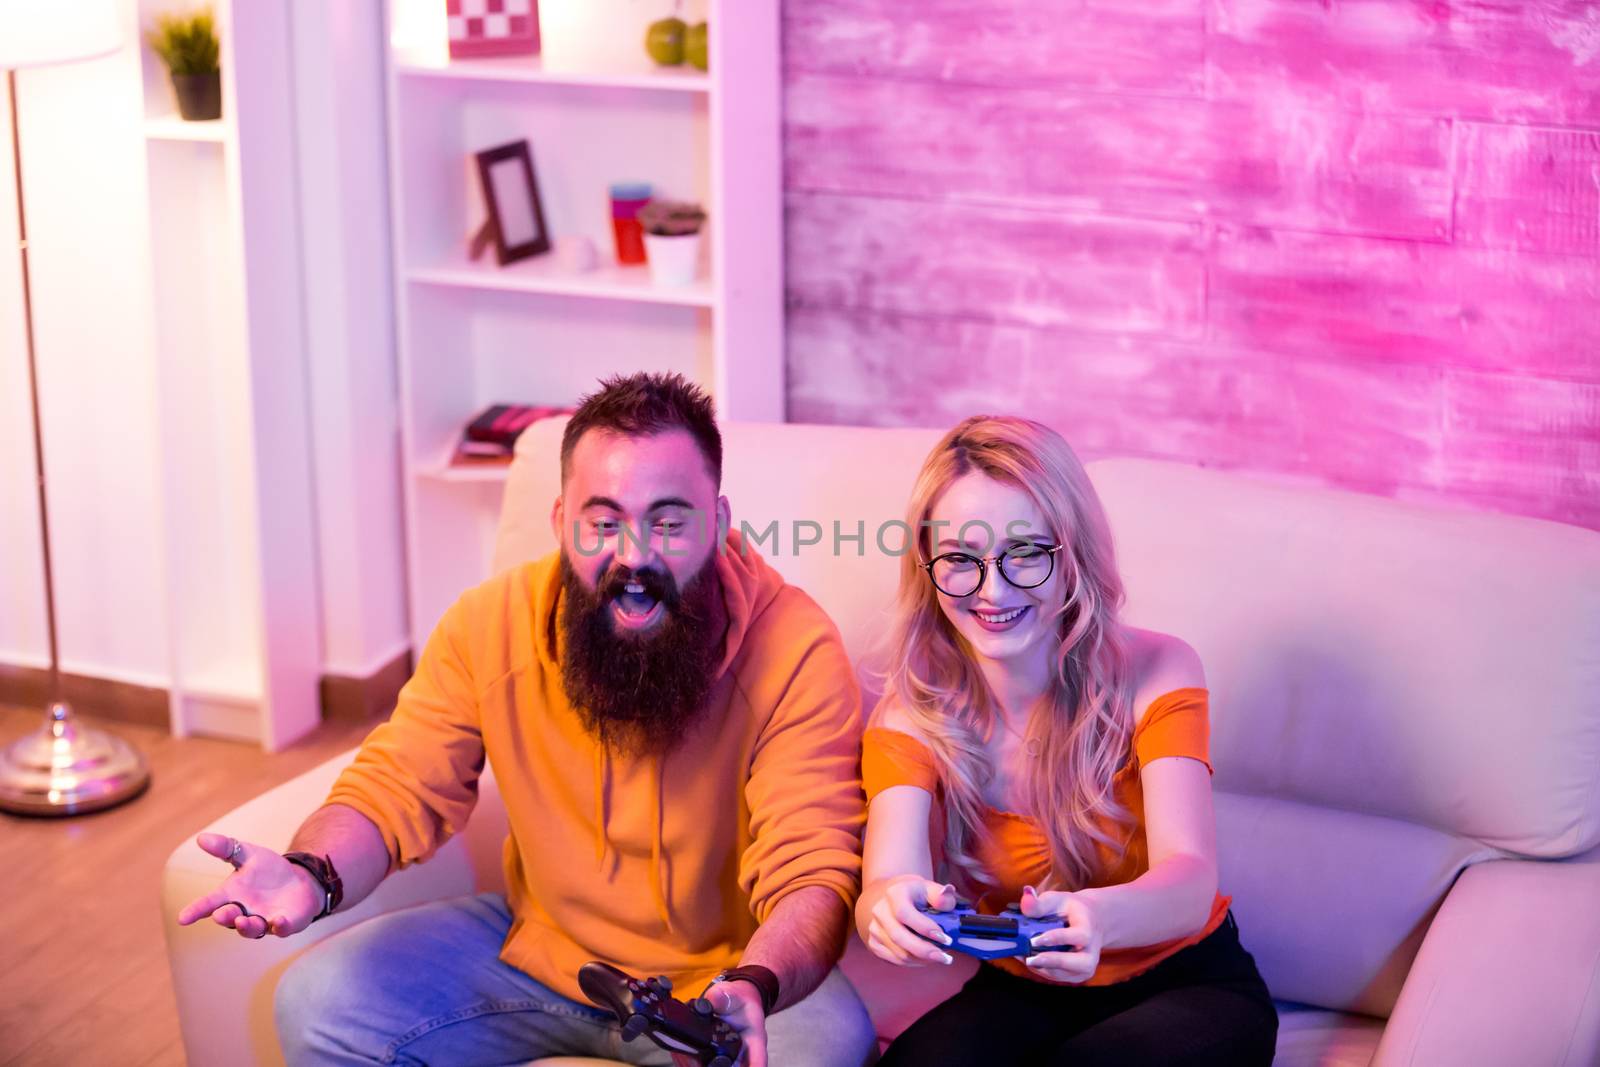 Boyfriend can't believe his girlfriend is winning at online video games. Couple sitting on sofa. Neon light in the room.